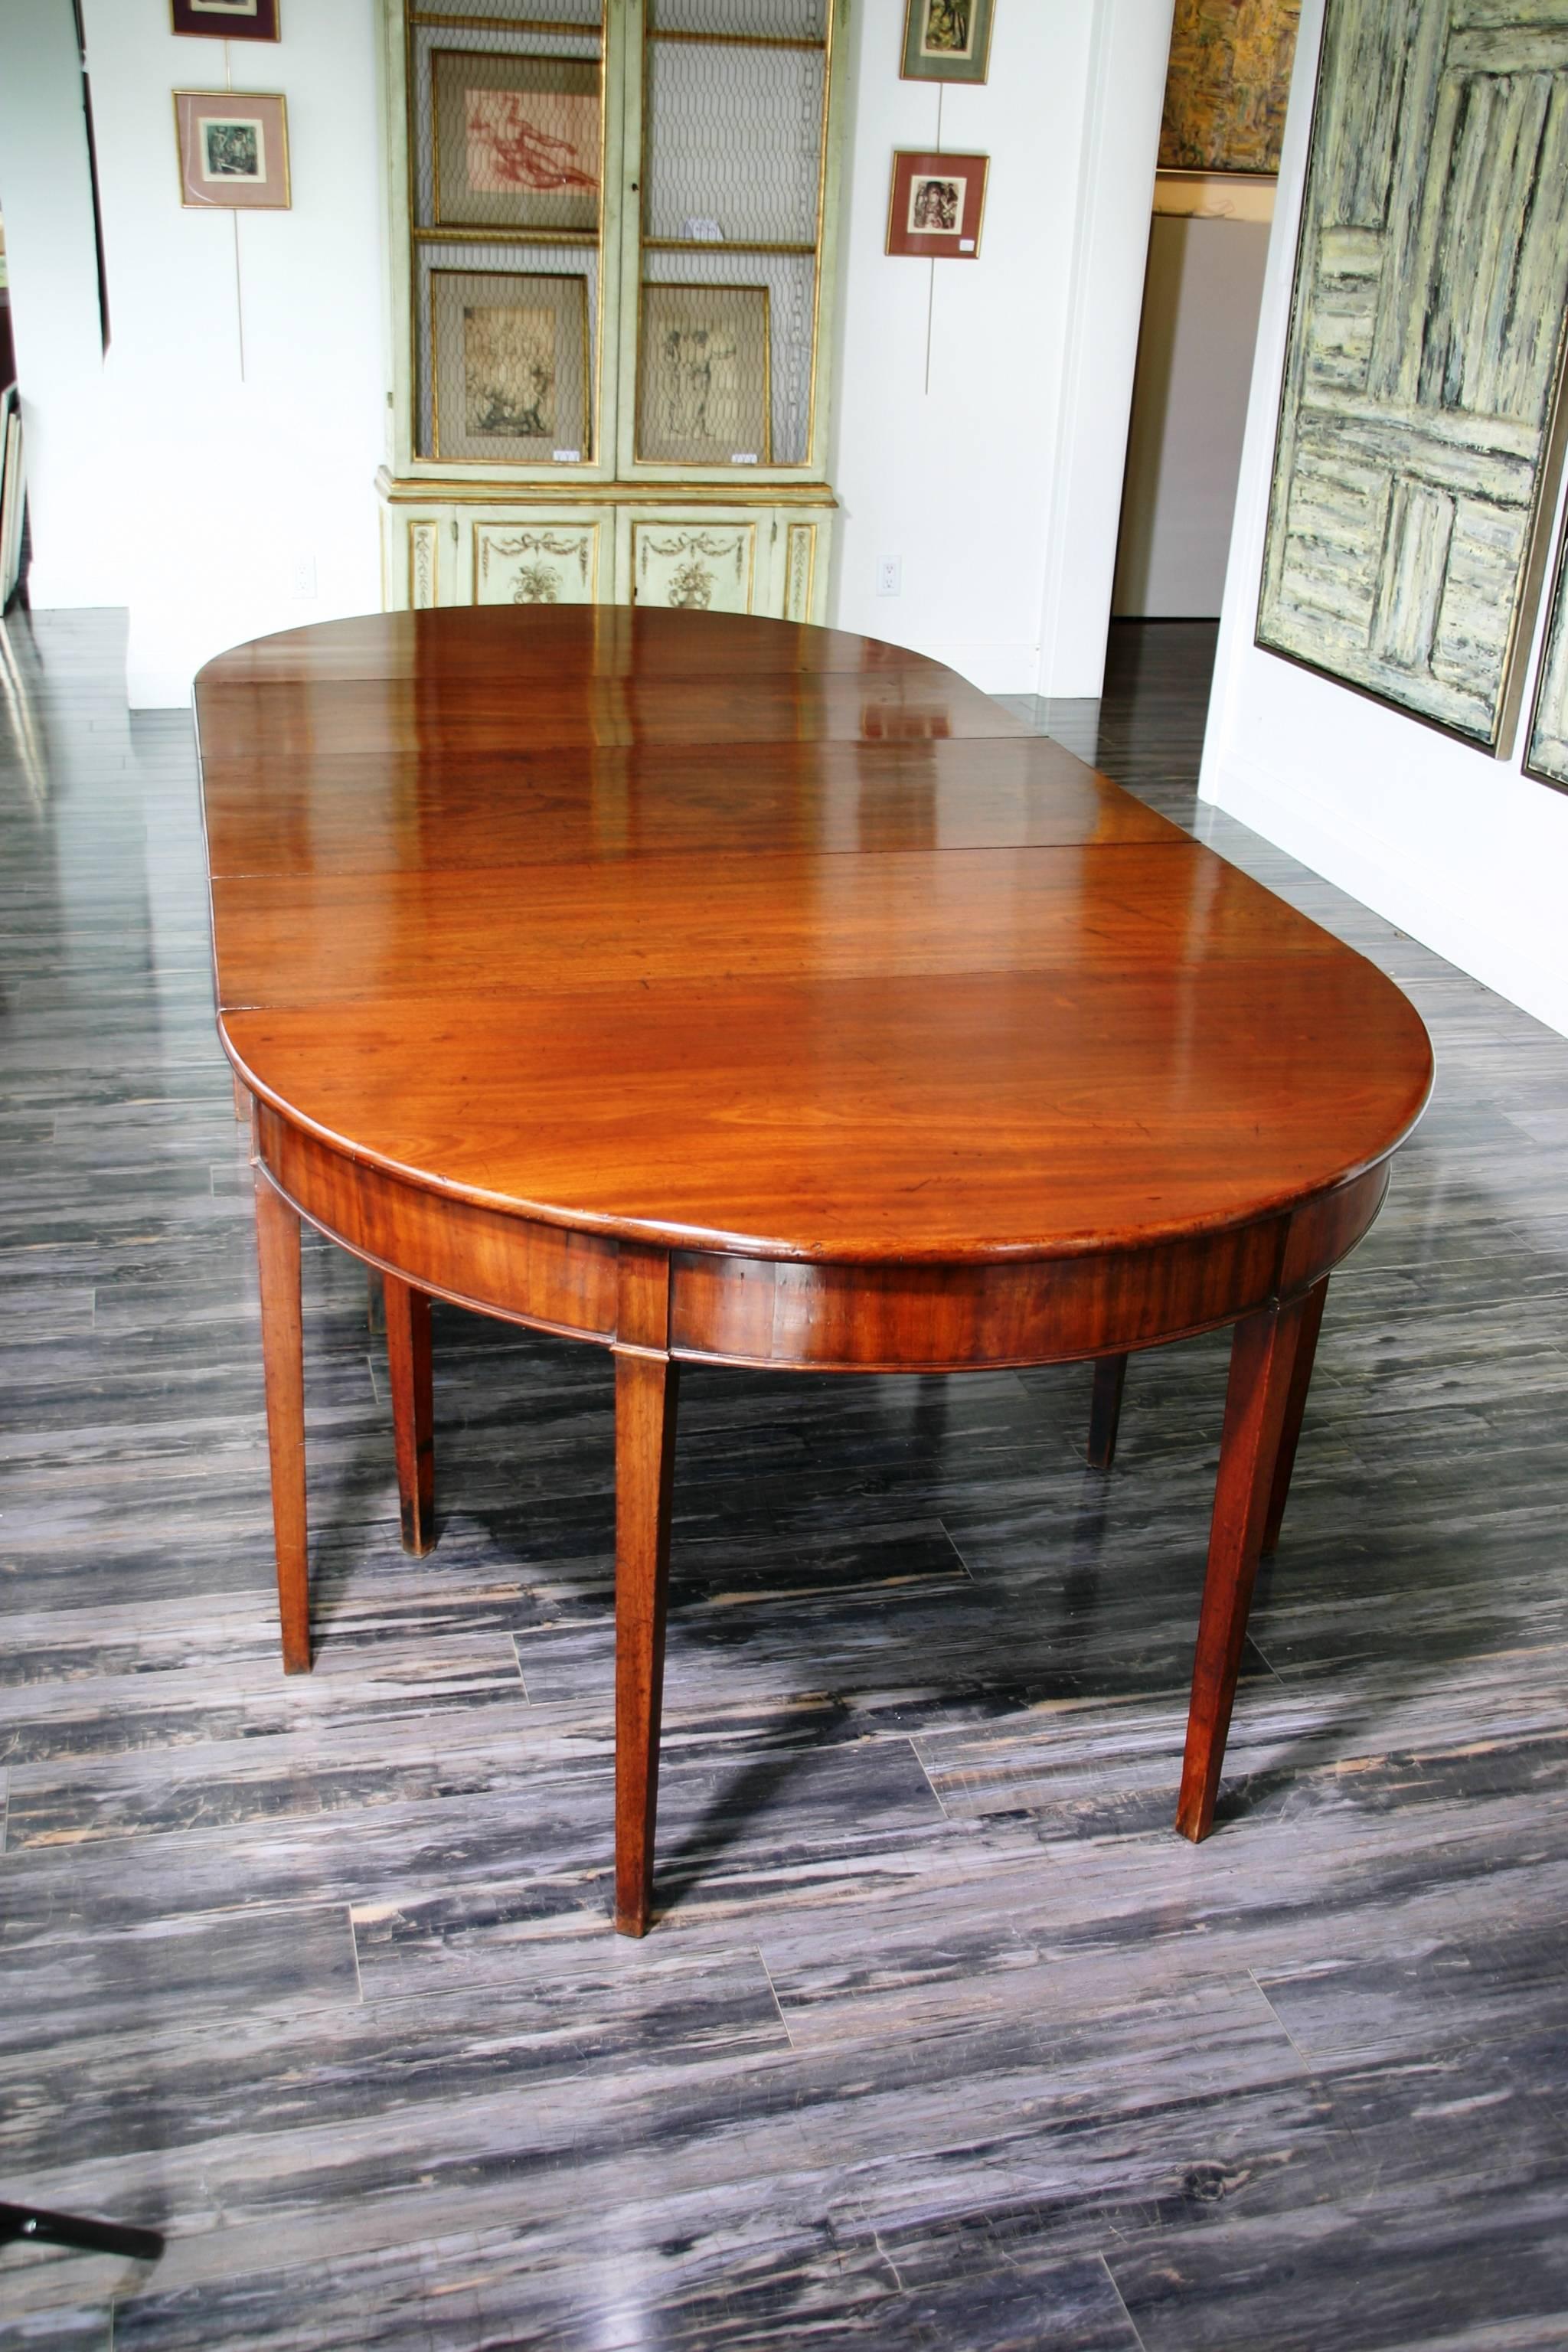 Mahogany Superb Original Late 18th Century Dining Table For Sale